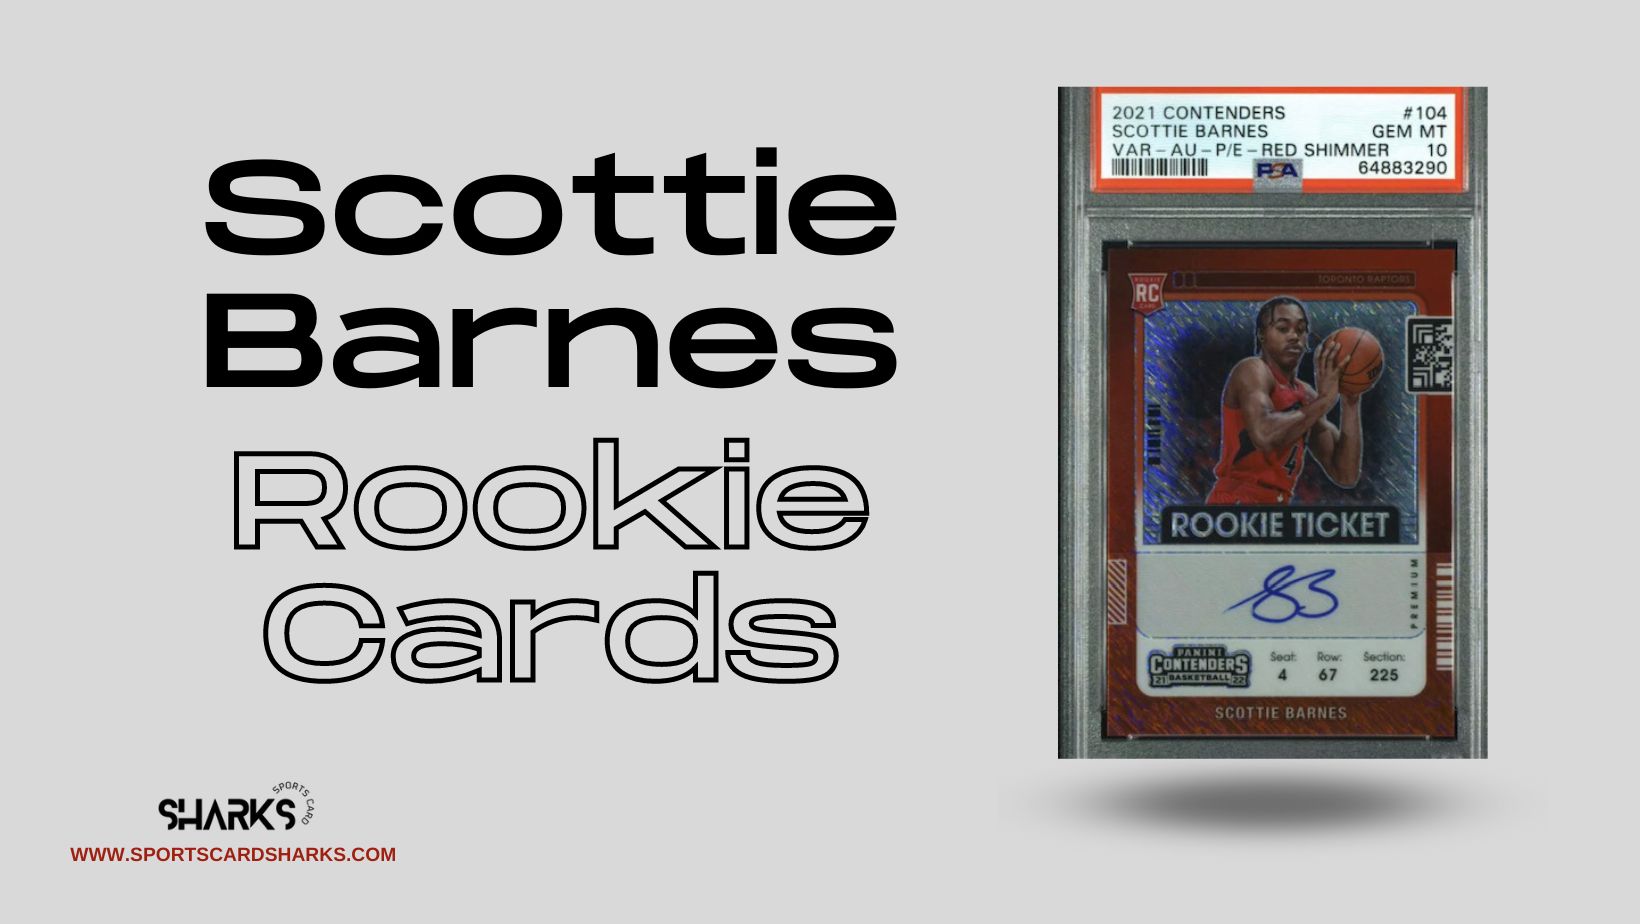 Featured image for the Best Scottie Barnes Rookie Cards blog post on Sports Card Sharks